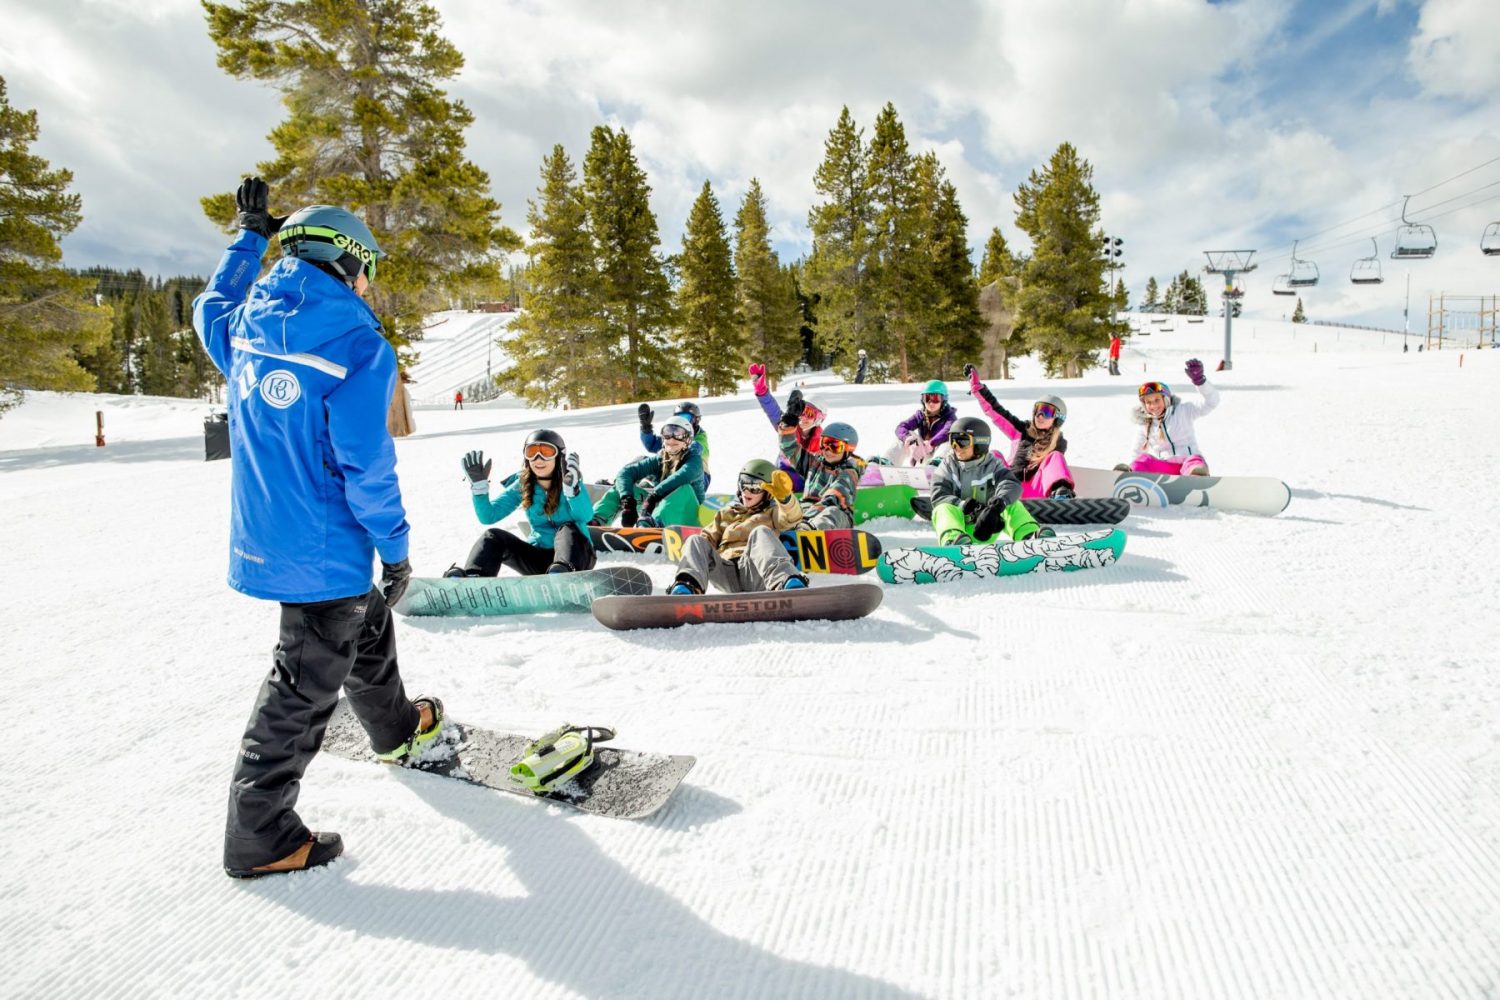 Kids Snowboard School at Vail, CO. Photo: Daniel Milchev. Vail Resorts. The Must-Read Guide to Vail.